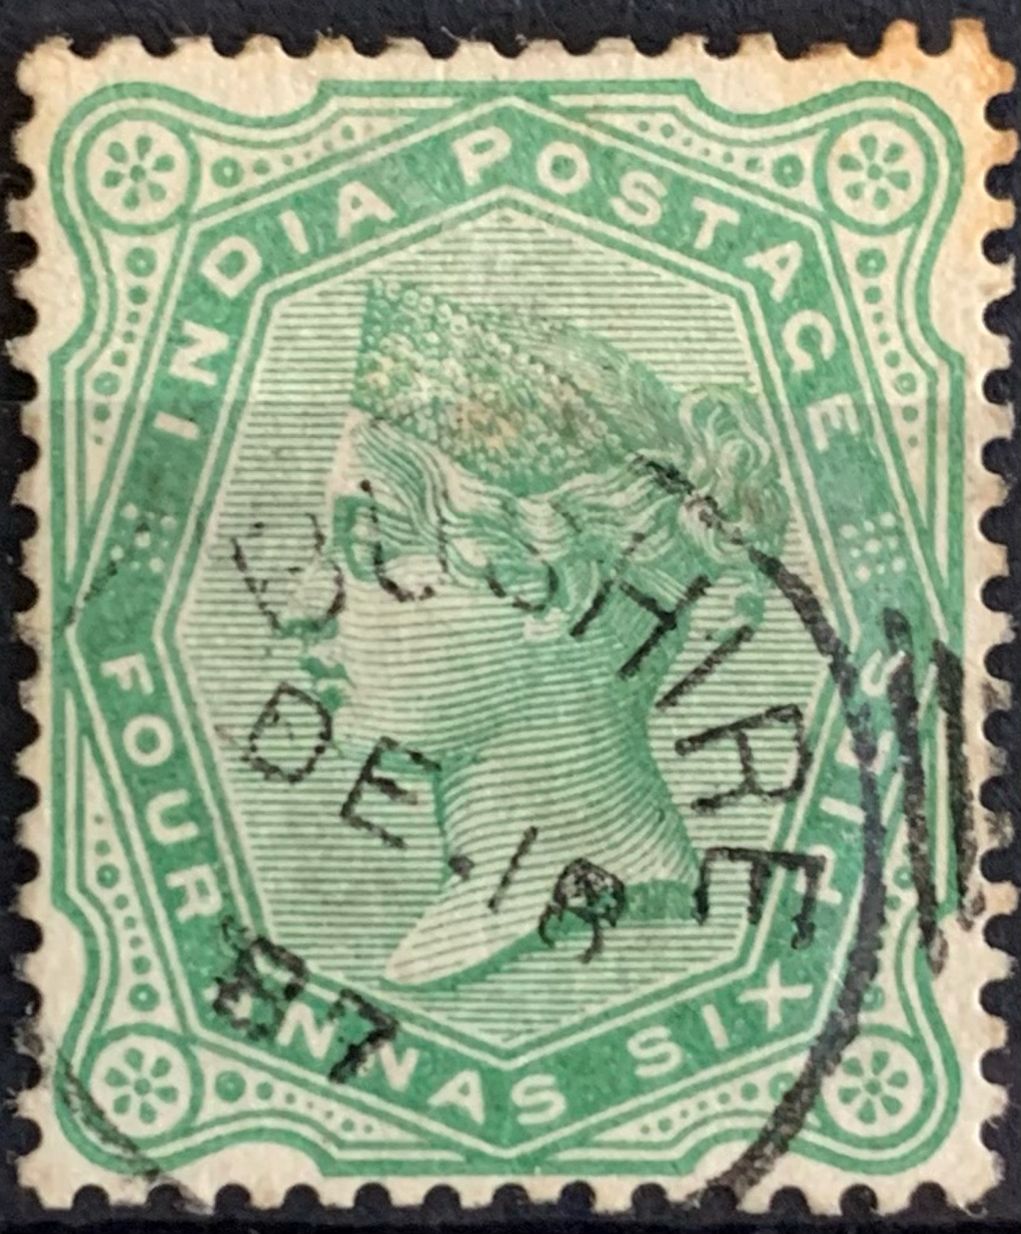 India 1882 QV 4a6p Used Abroad in BUSHIRE Fine Cancelled